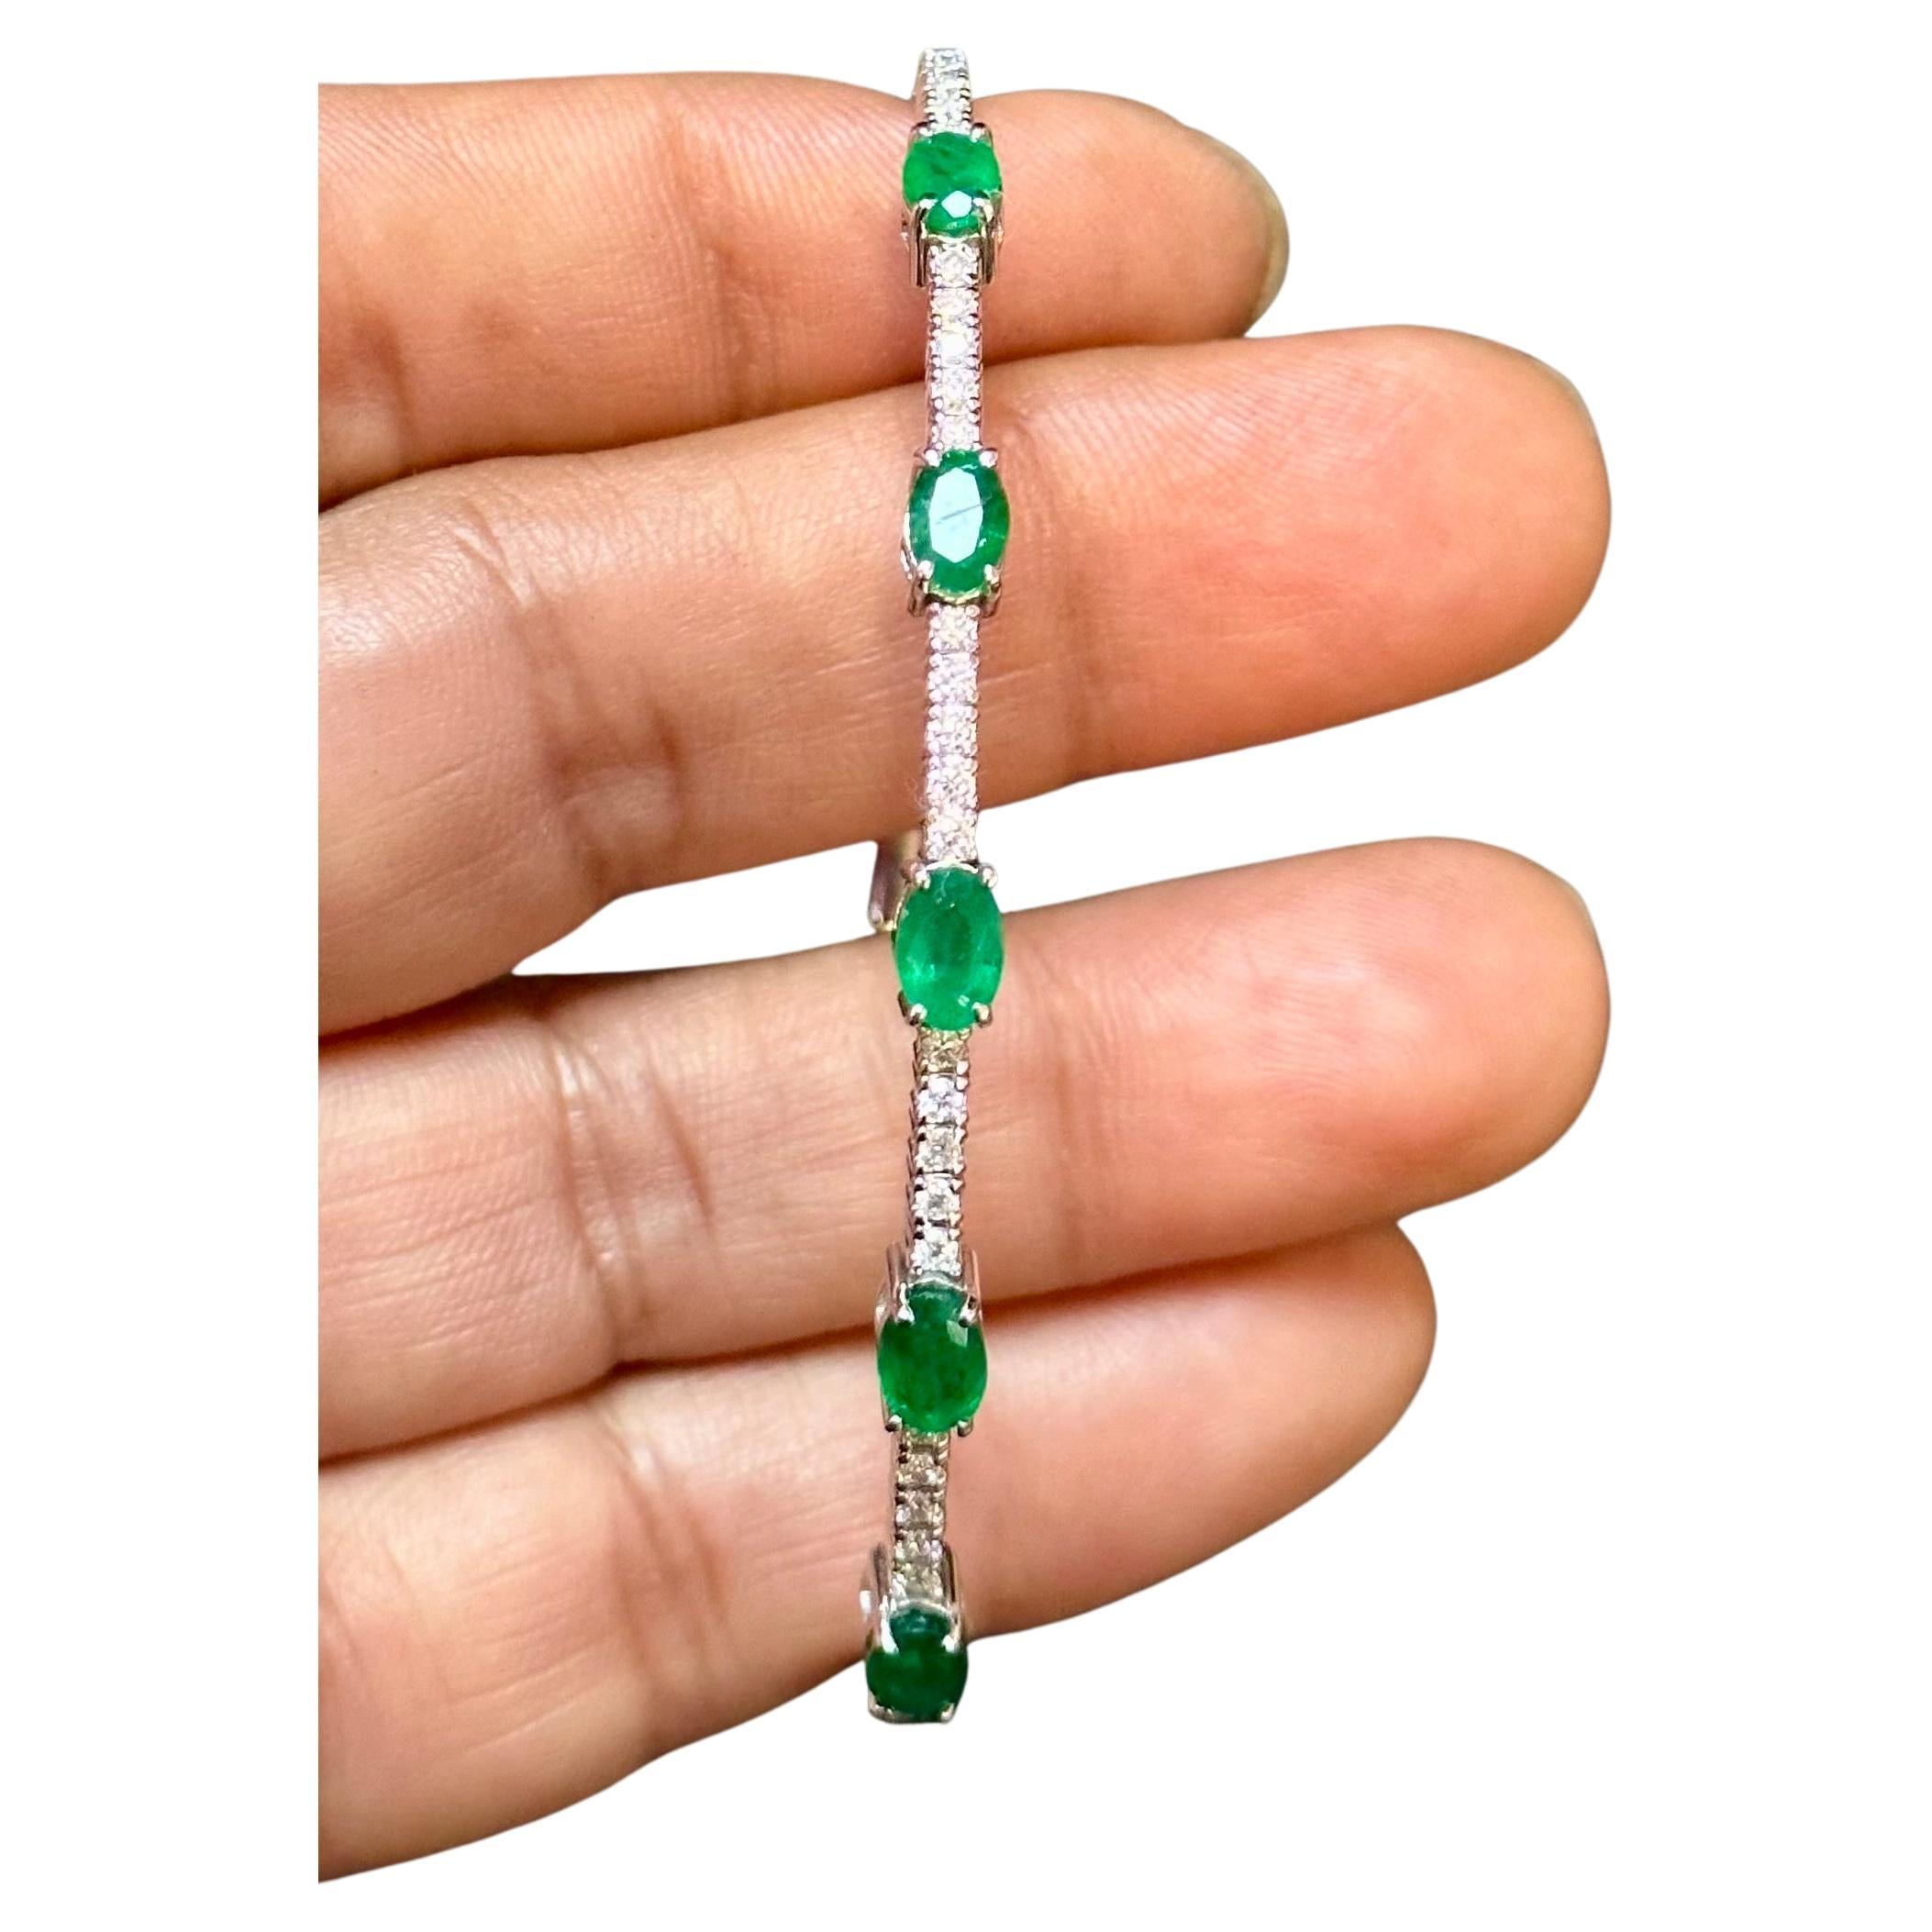 Introducing our stunning 14 Karat White Gold Bangle Bracelet adorned with approximately 2 carats of Natural Brazilian Emeralds and shimmering diamonds. This exquisite piece showcases five oval-cut emeralds, each separated by a row of brilliant-cut